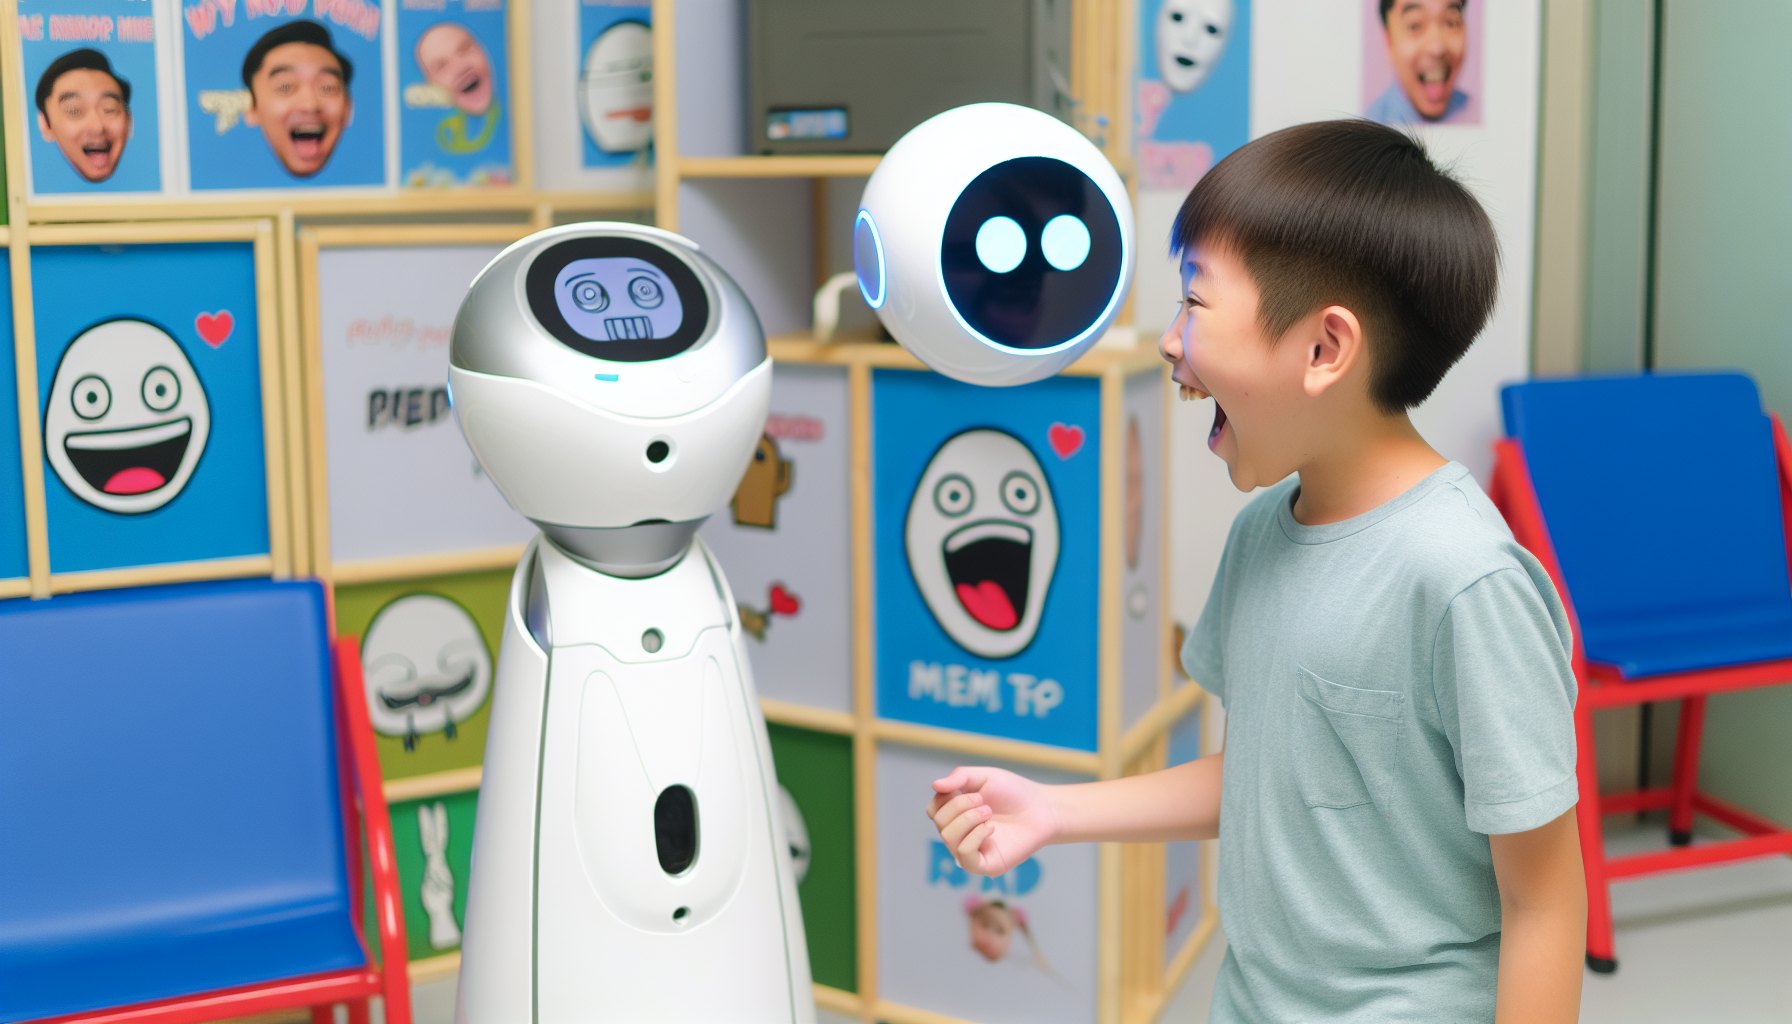 Pepper Robot interacting with a child during a meme therapy session